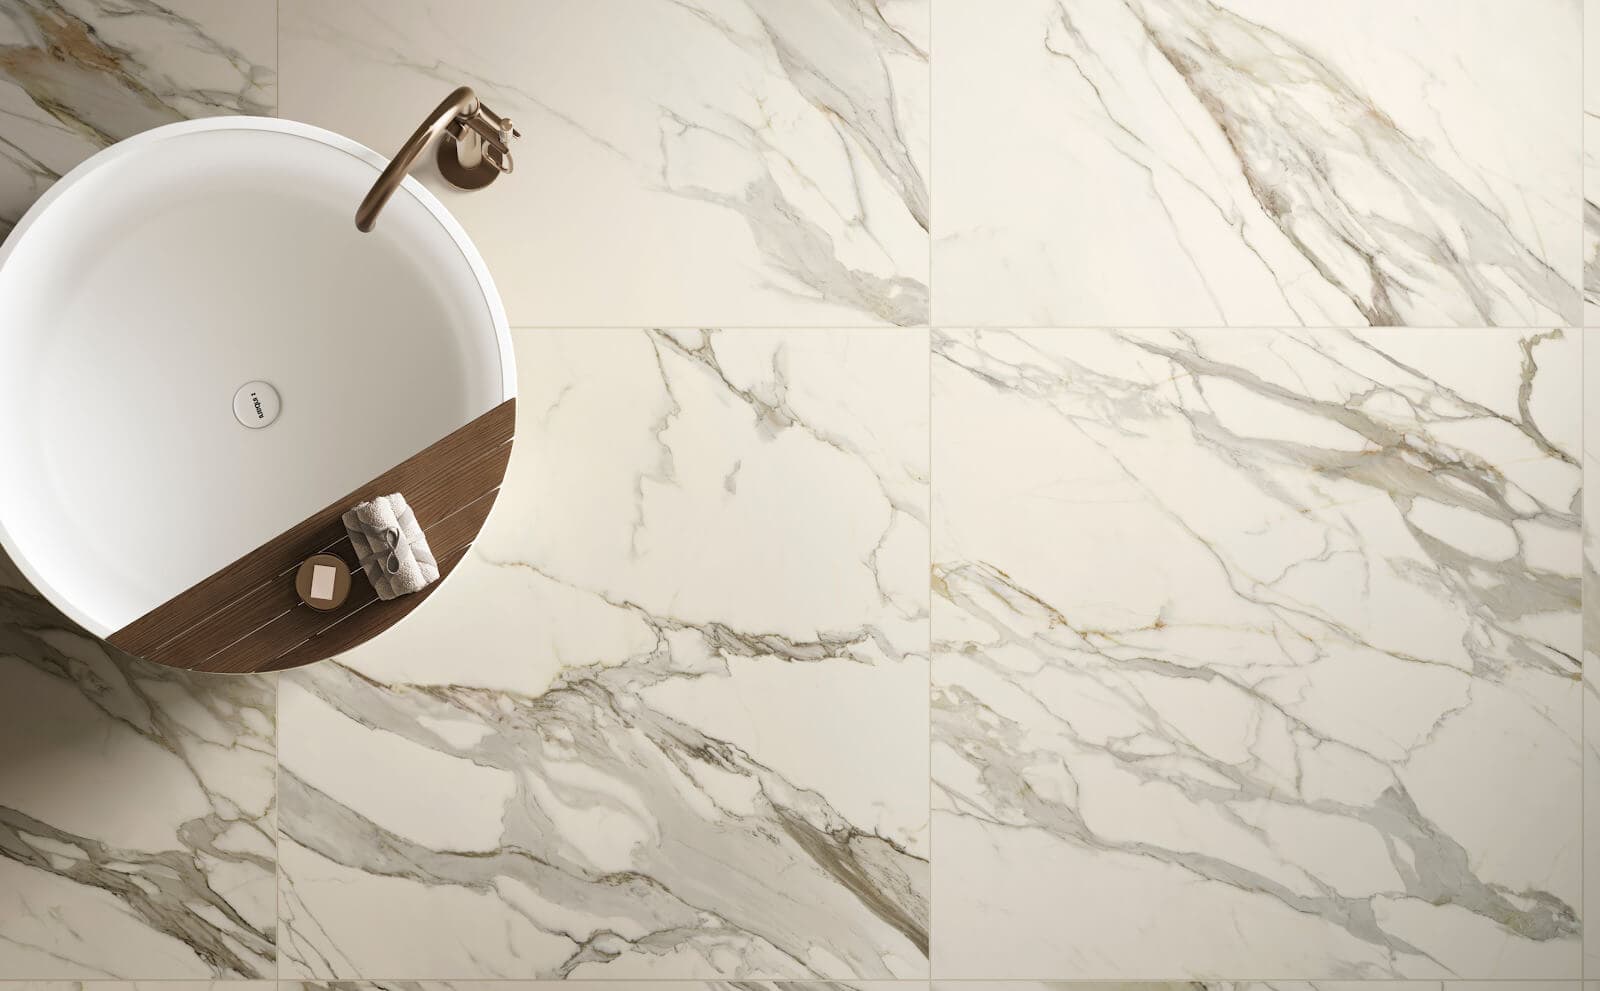 White Marble-Look Porcelain and bathroom sink